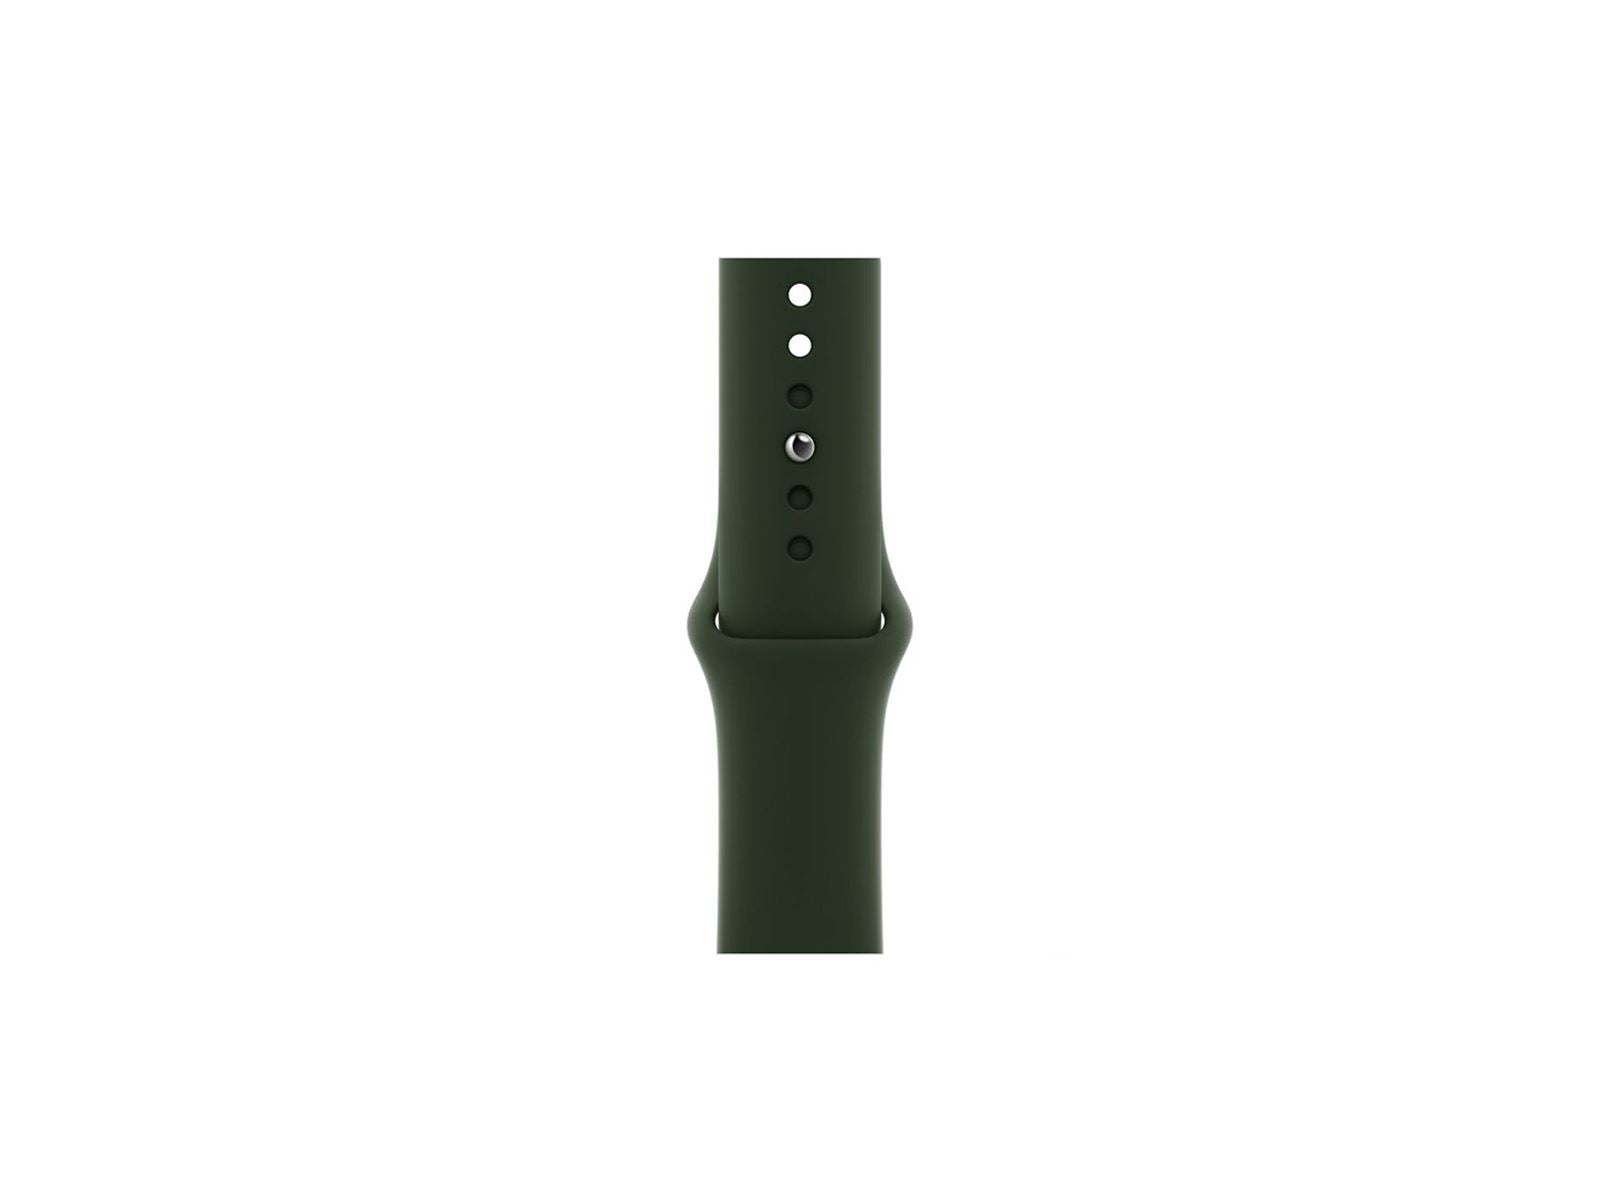 Cyprus Green 40mm Apple Watch Strap on a white background